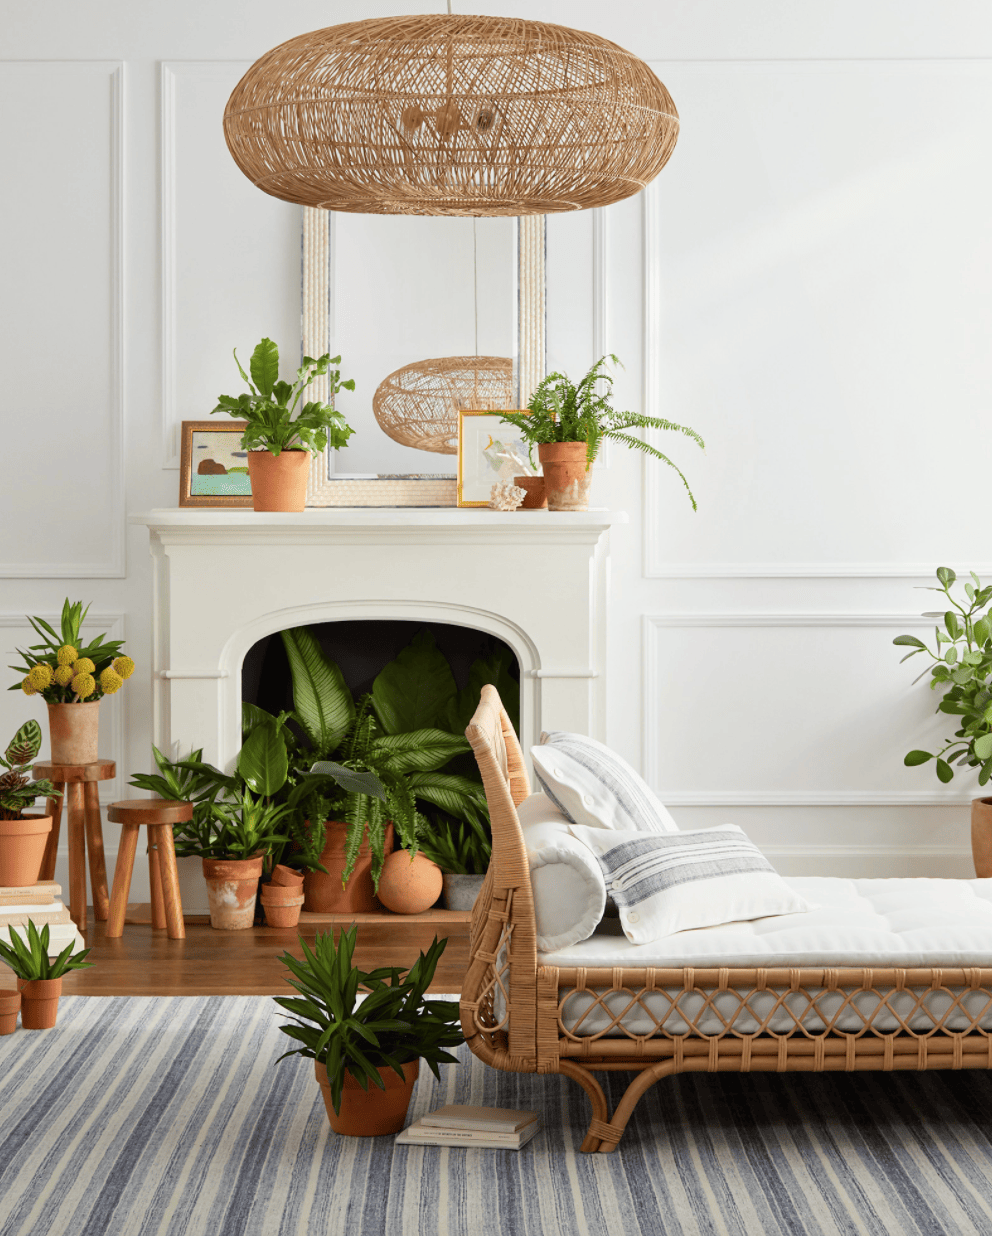 A rattan day bed in an airy room full of plants in terracotta planters